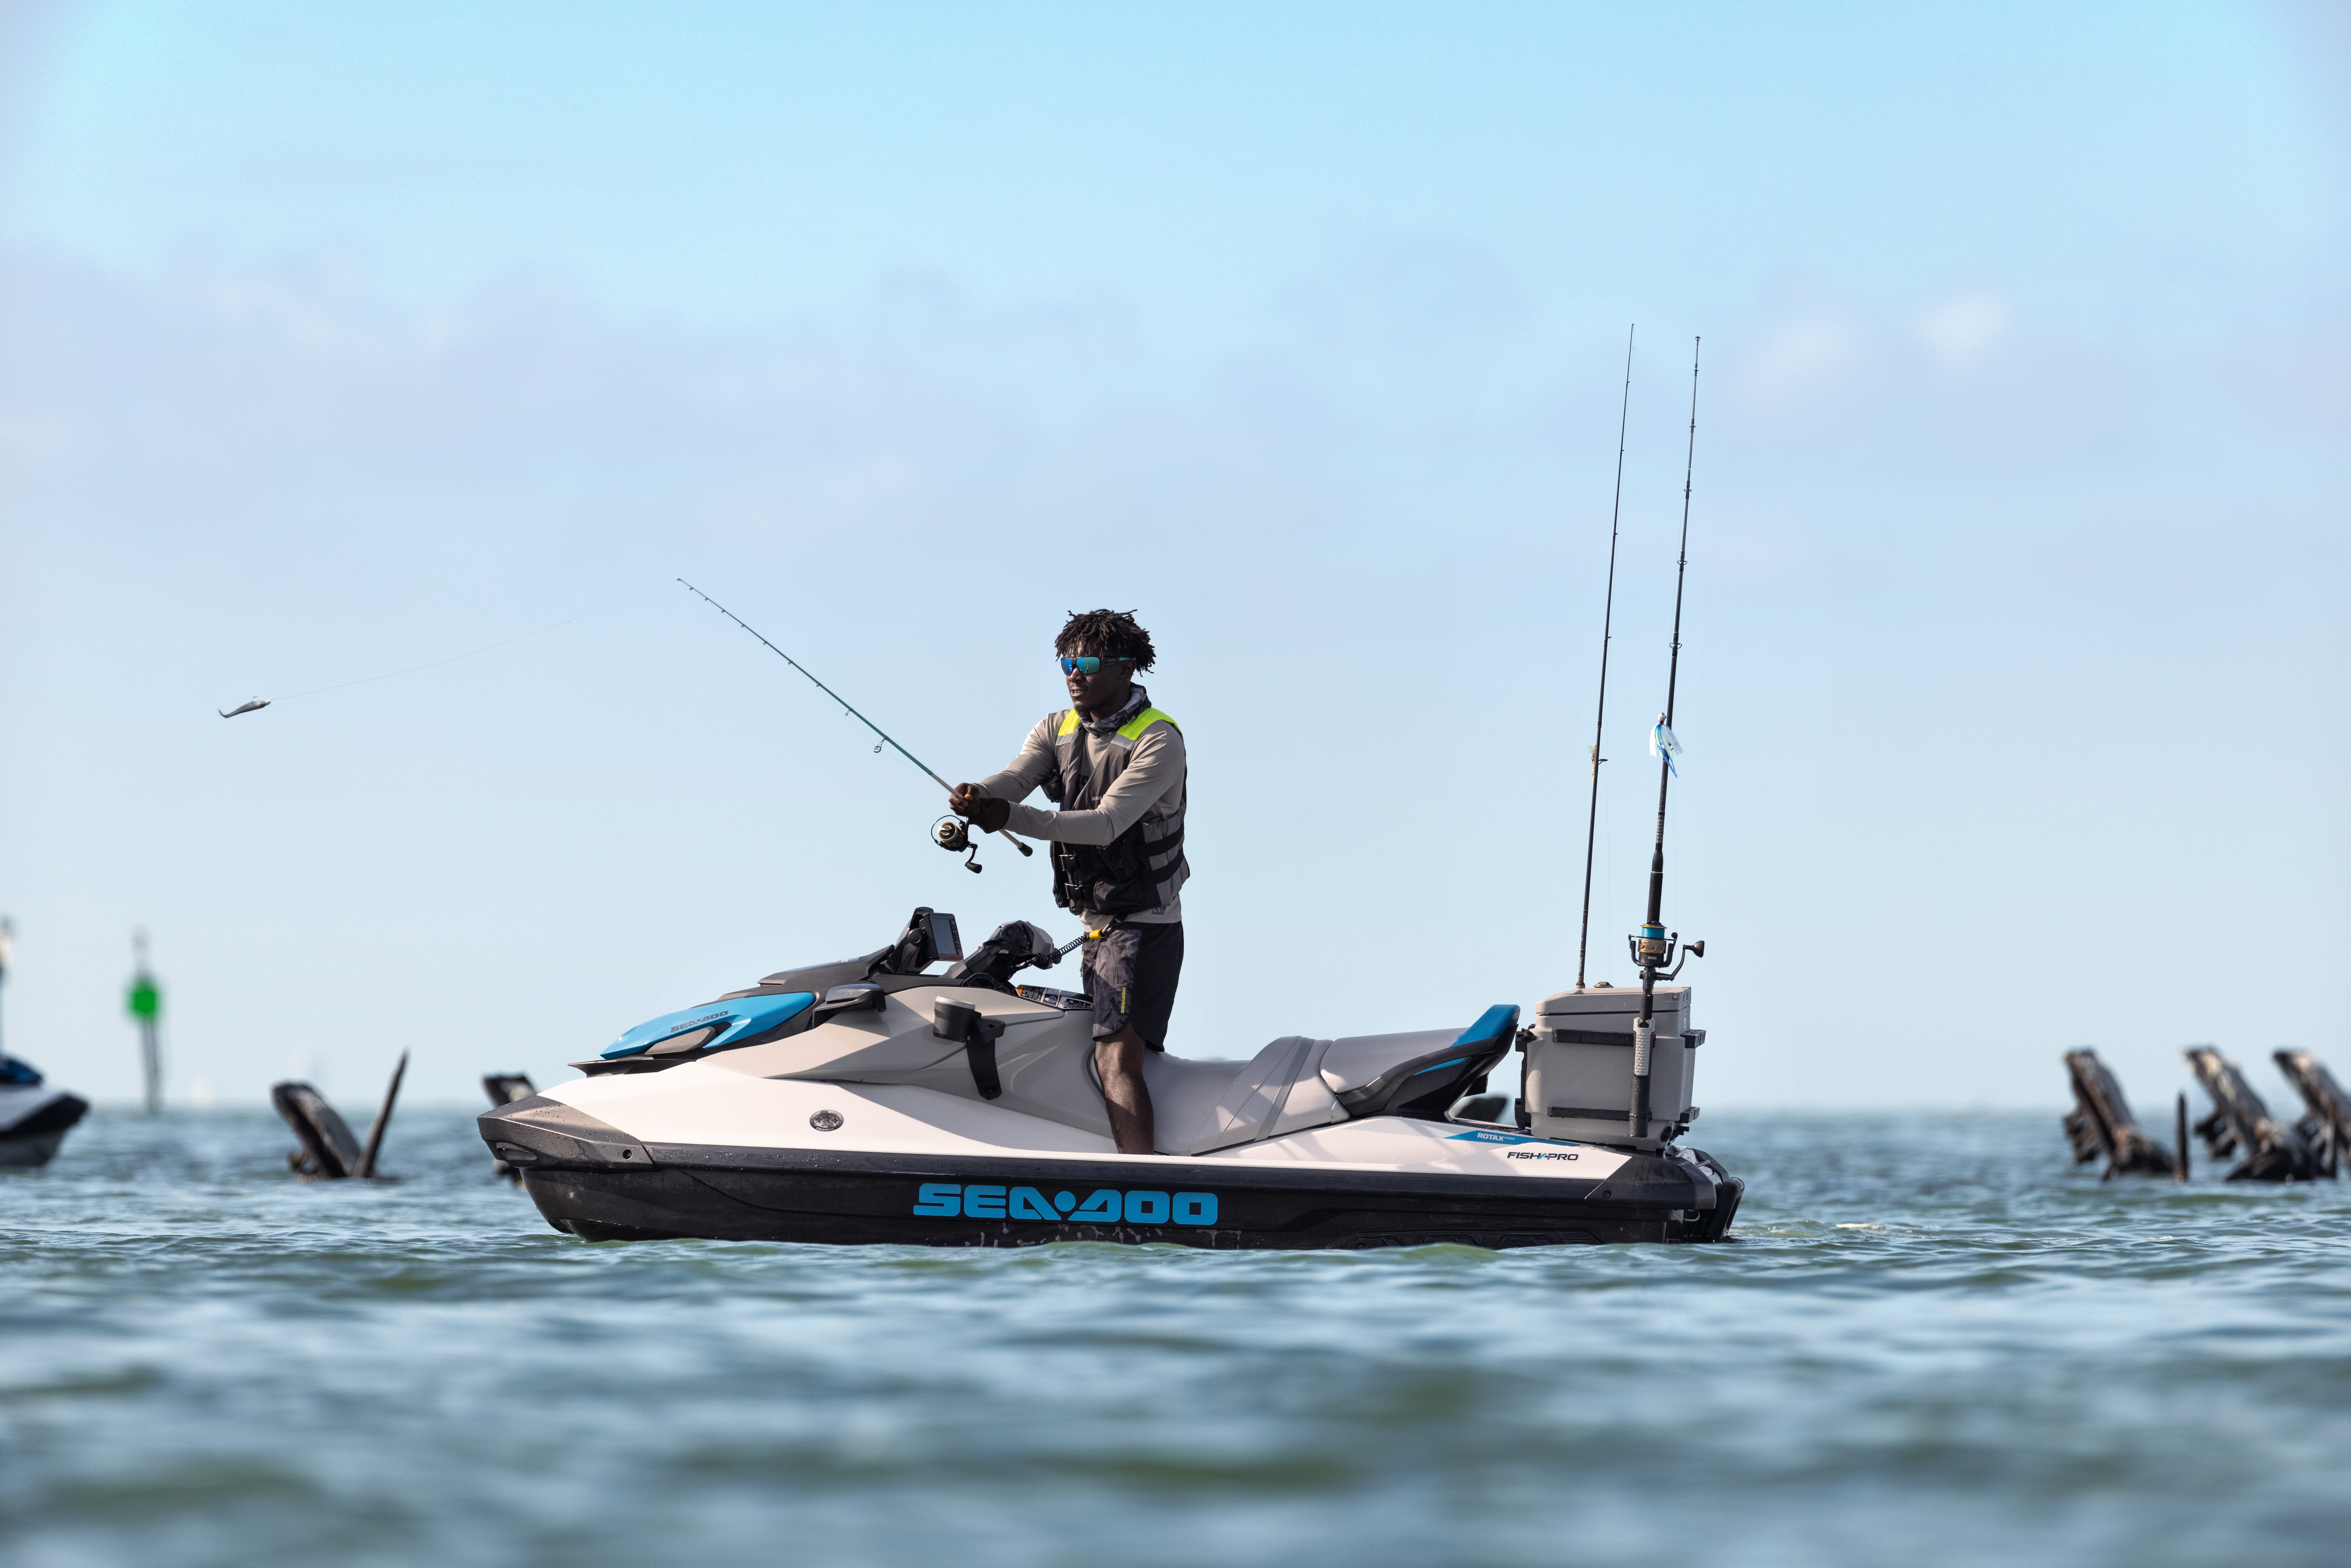 TAKE FISHING TO THE NEXT LEVEL WITH THE ALL-NEW 2022 SEA-DOO FISH PRO